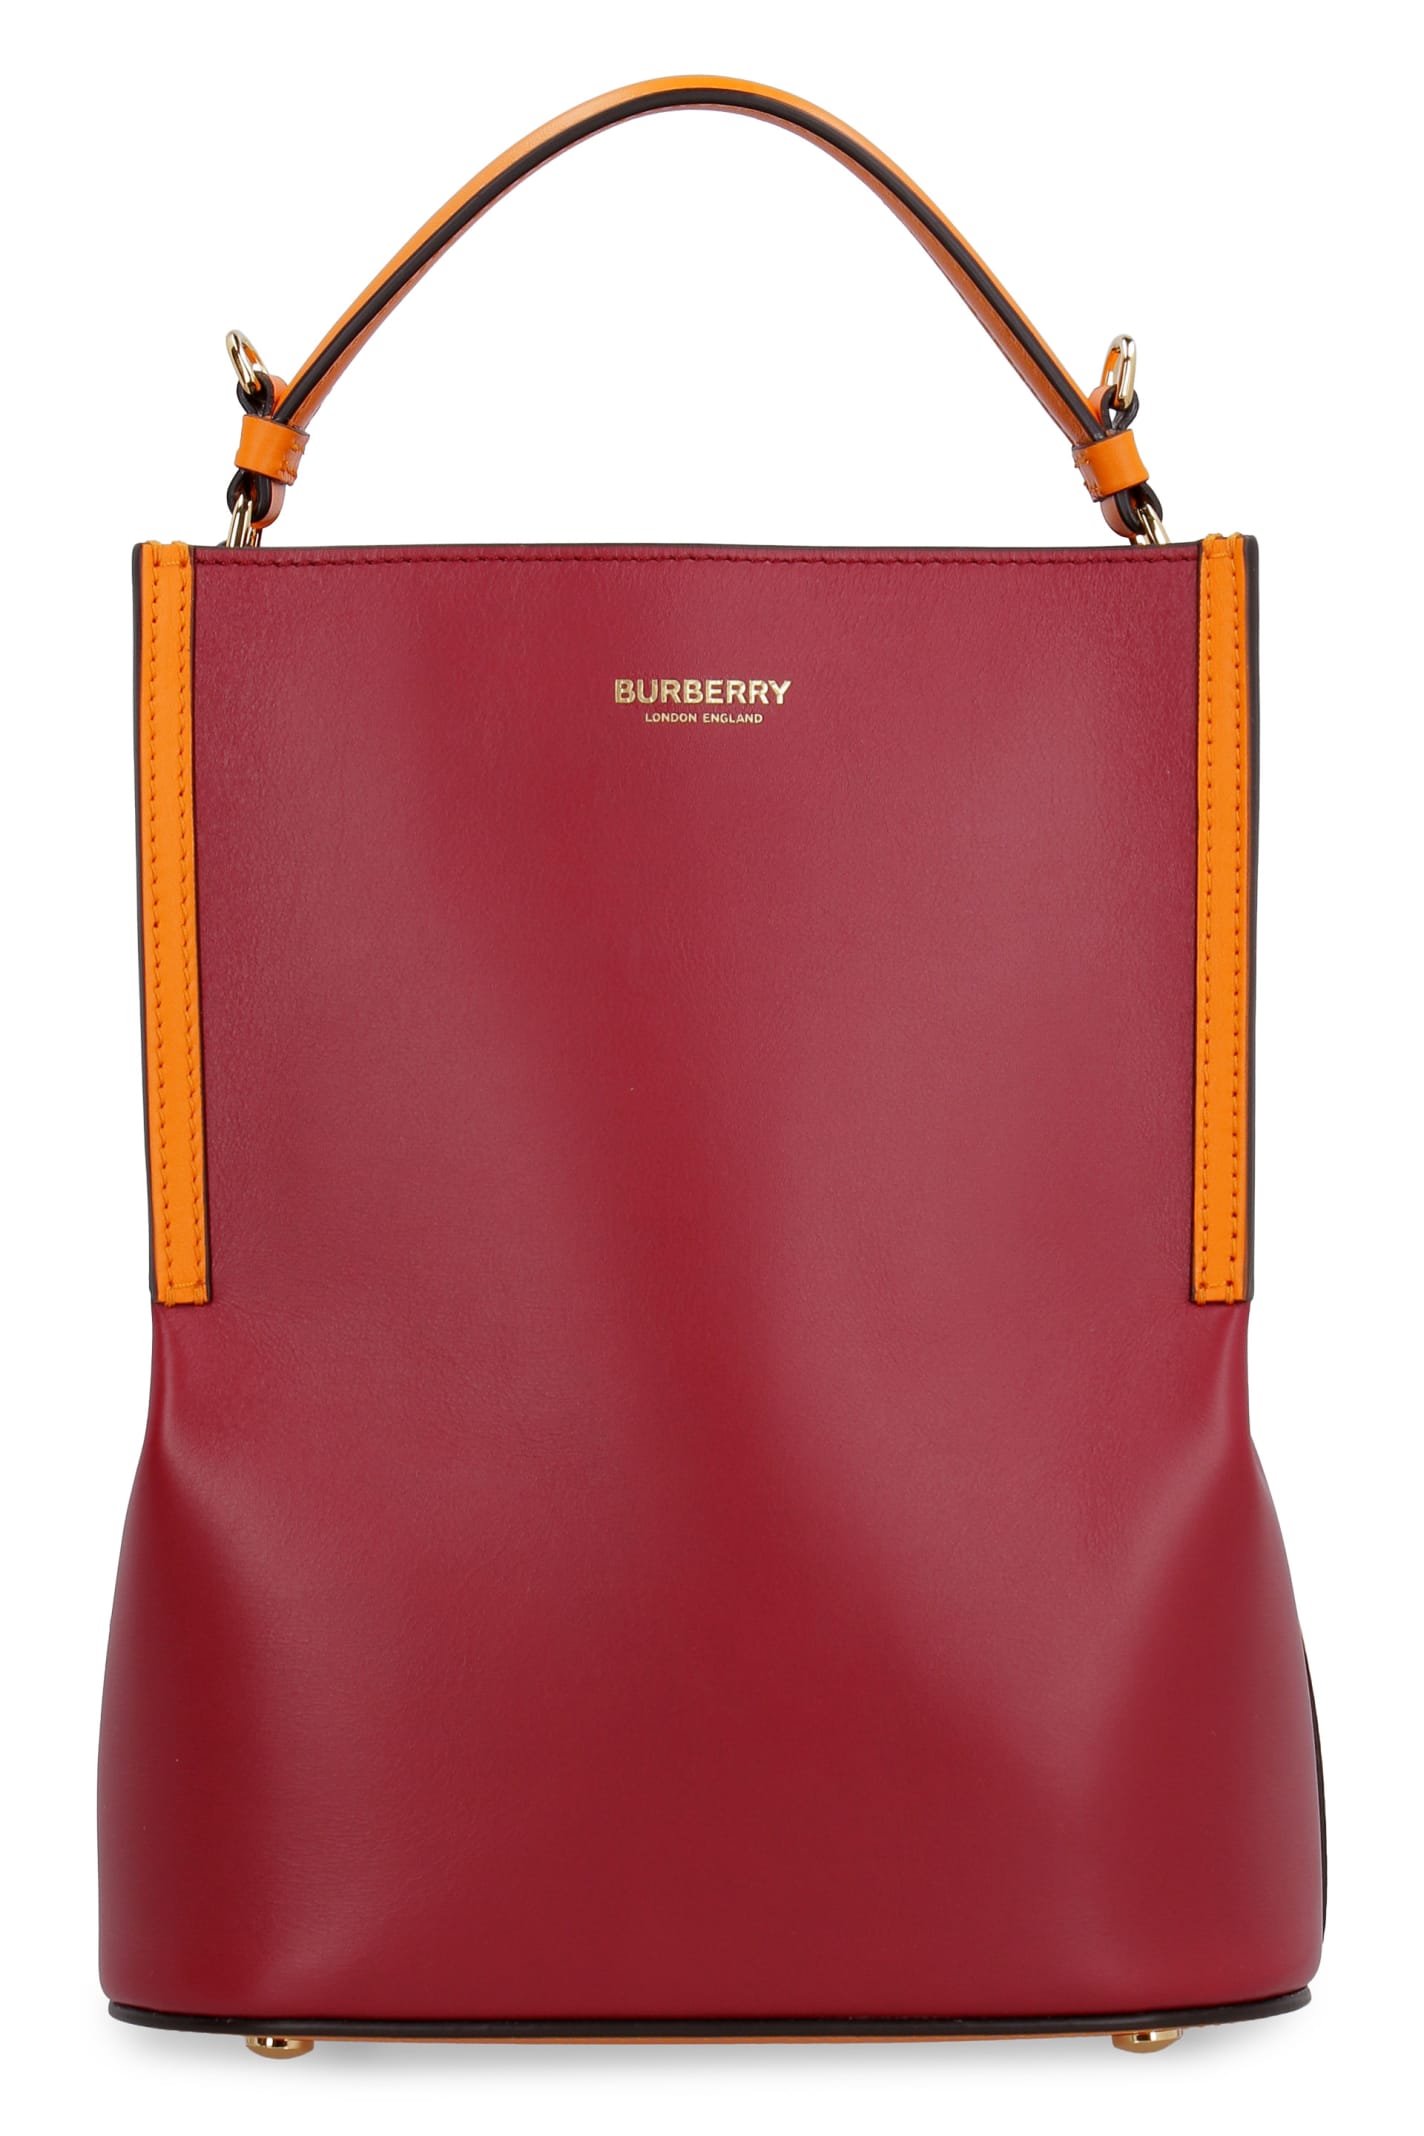 BURBERRY PEGGY LEATHER BUCKET BAG,11292307